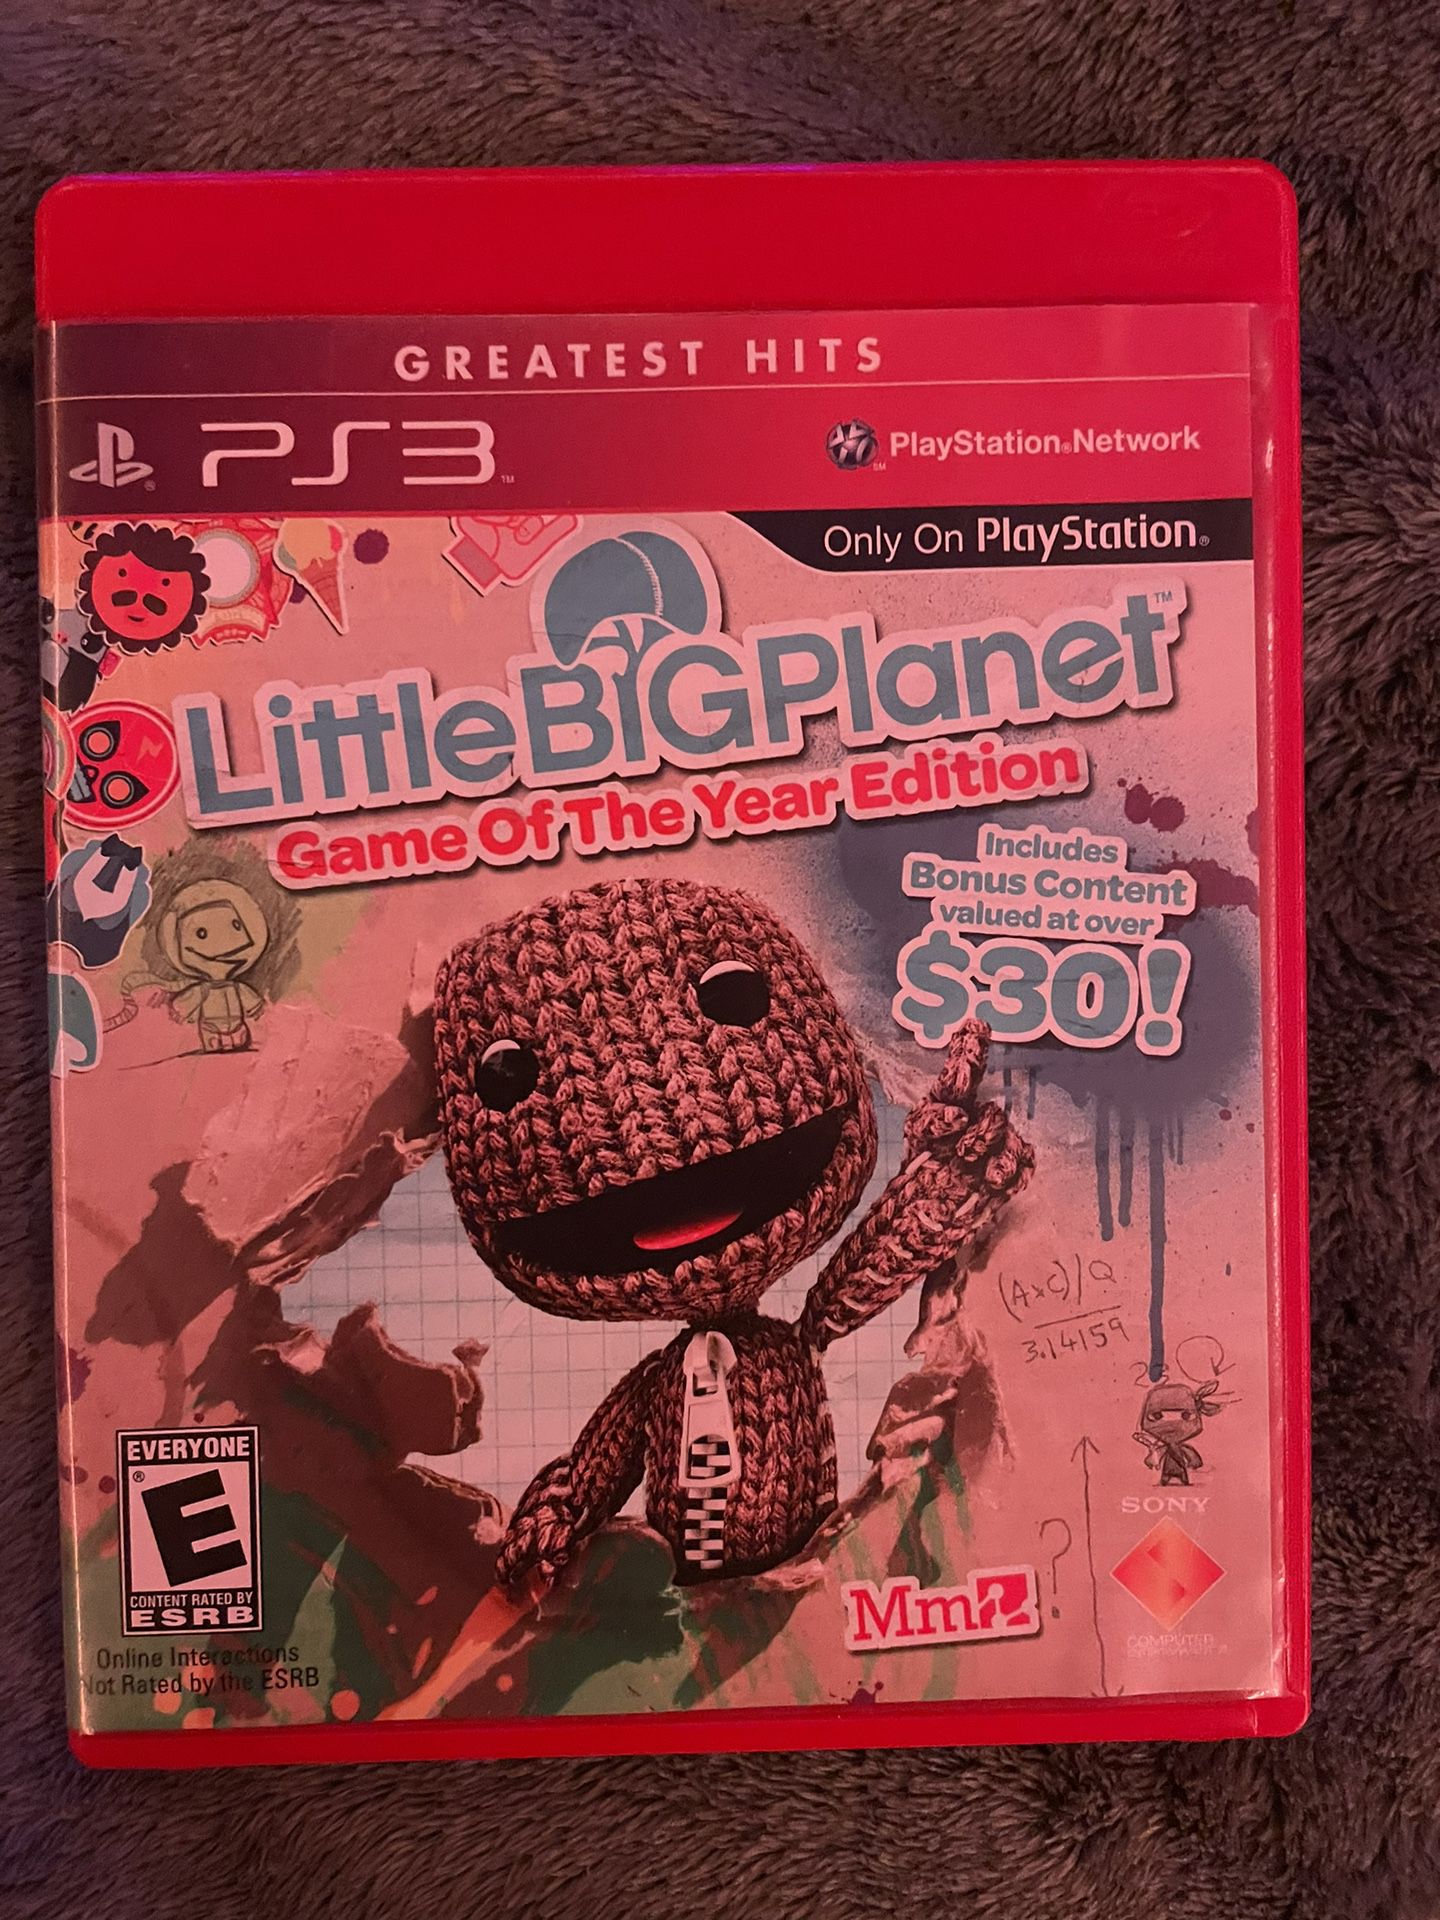 Little Big Planet GOTY Edition (PS3)